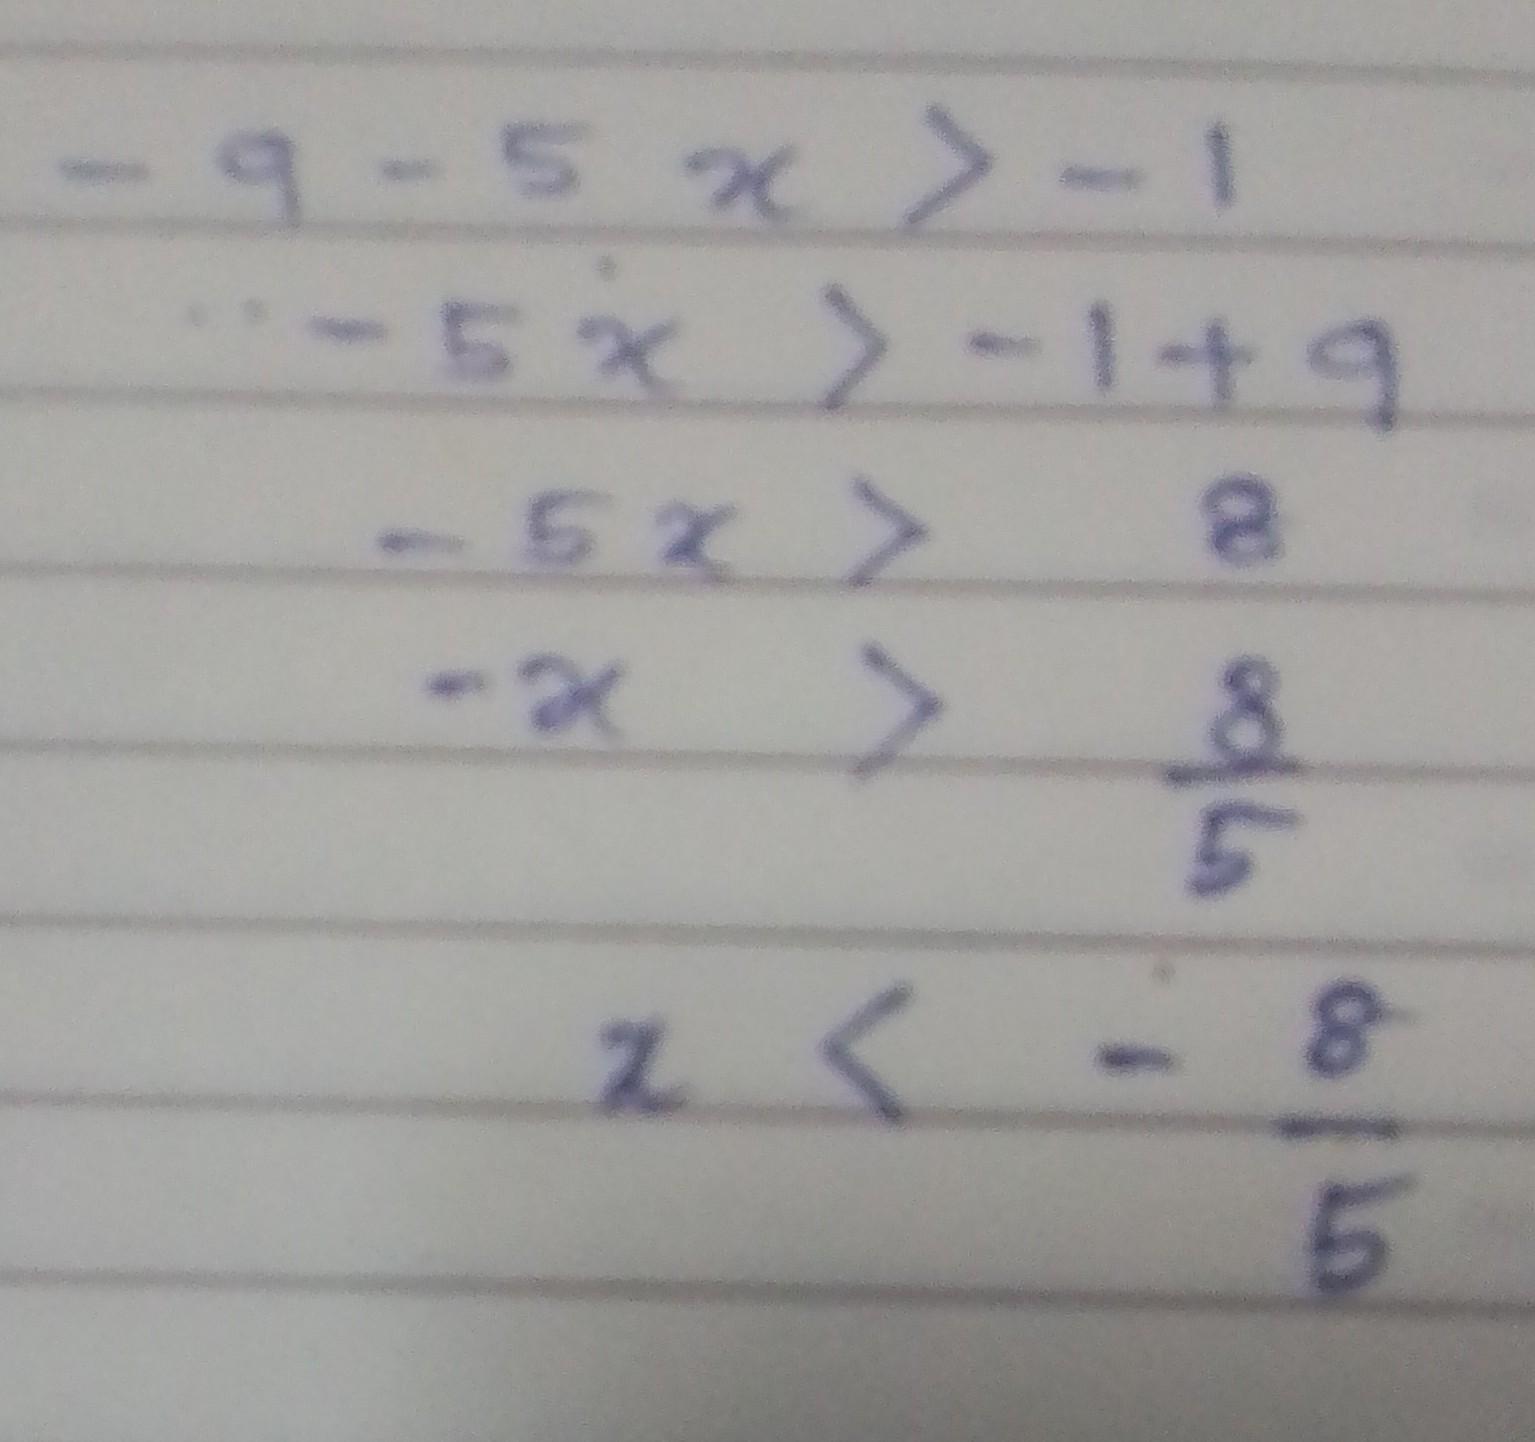 95x&gt;-12-5-10Or NoneWhich Of The Following Values Are Solutions To The Inequality 